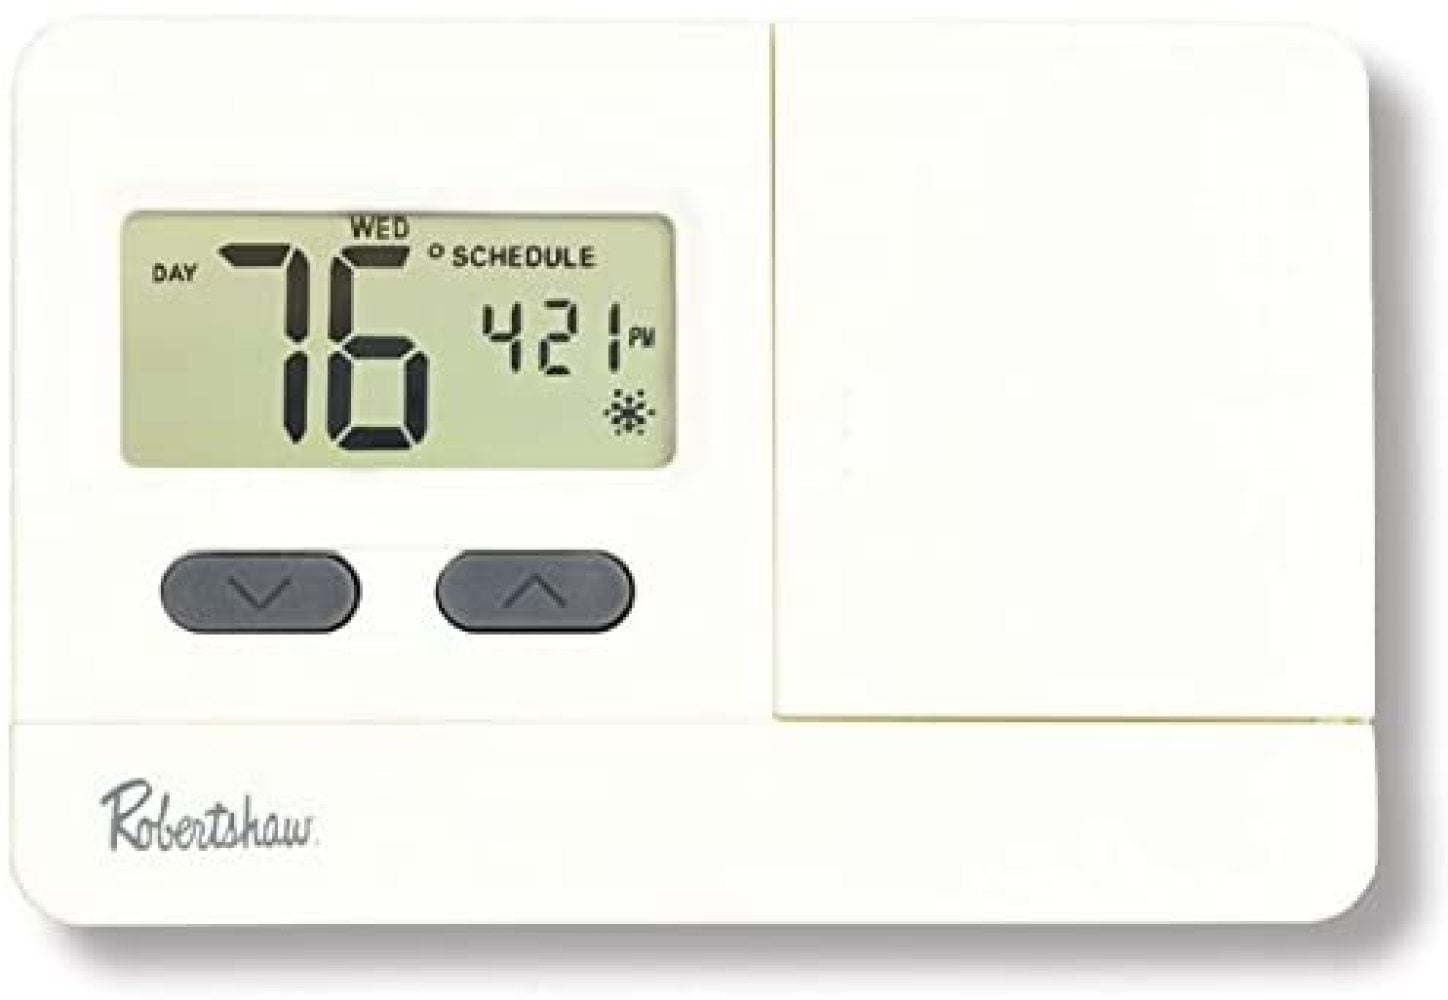 Robertshaw RS3110 1 Heat/1 Cool Digital 5-2 Day Programmable Thermostat for sale online 